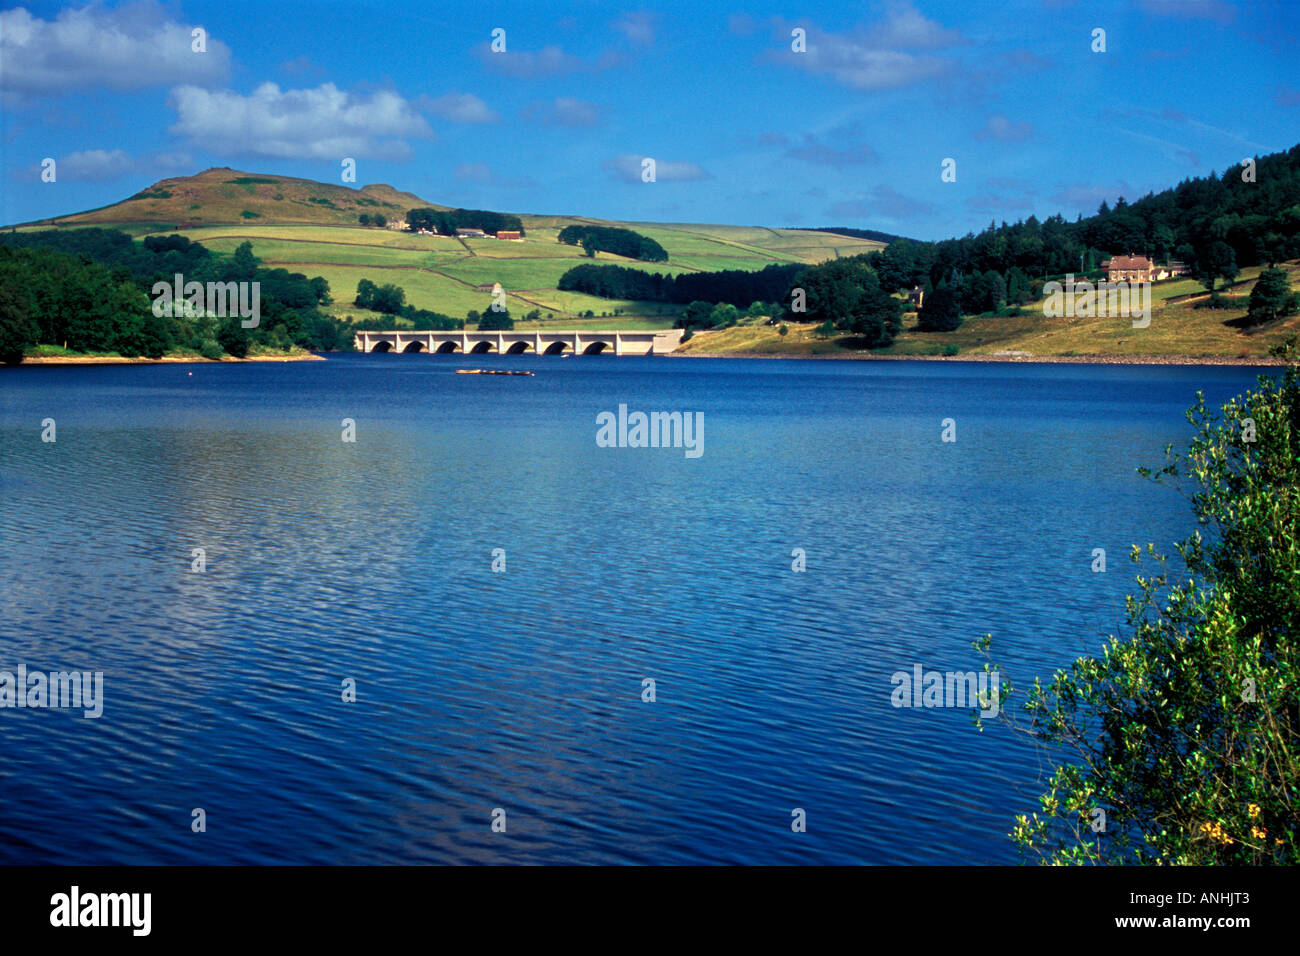 Ladybower Reservoir with Crook Hill and Ashopton viaduct in the distance, Derbyshire, Peak District National Park, England, UK. Stock Photo